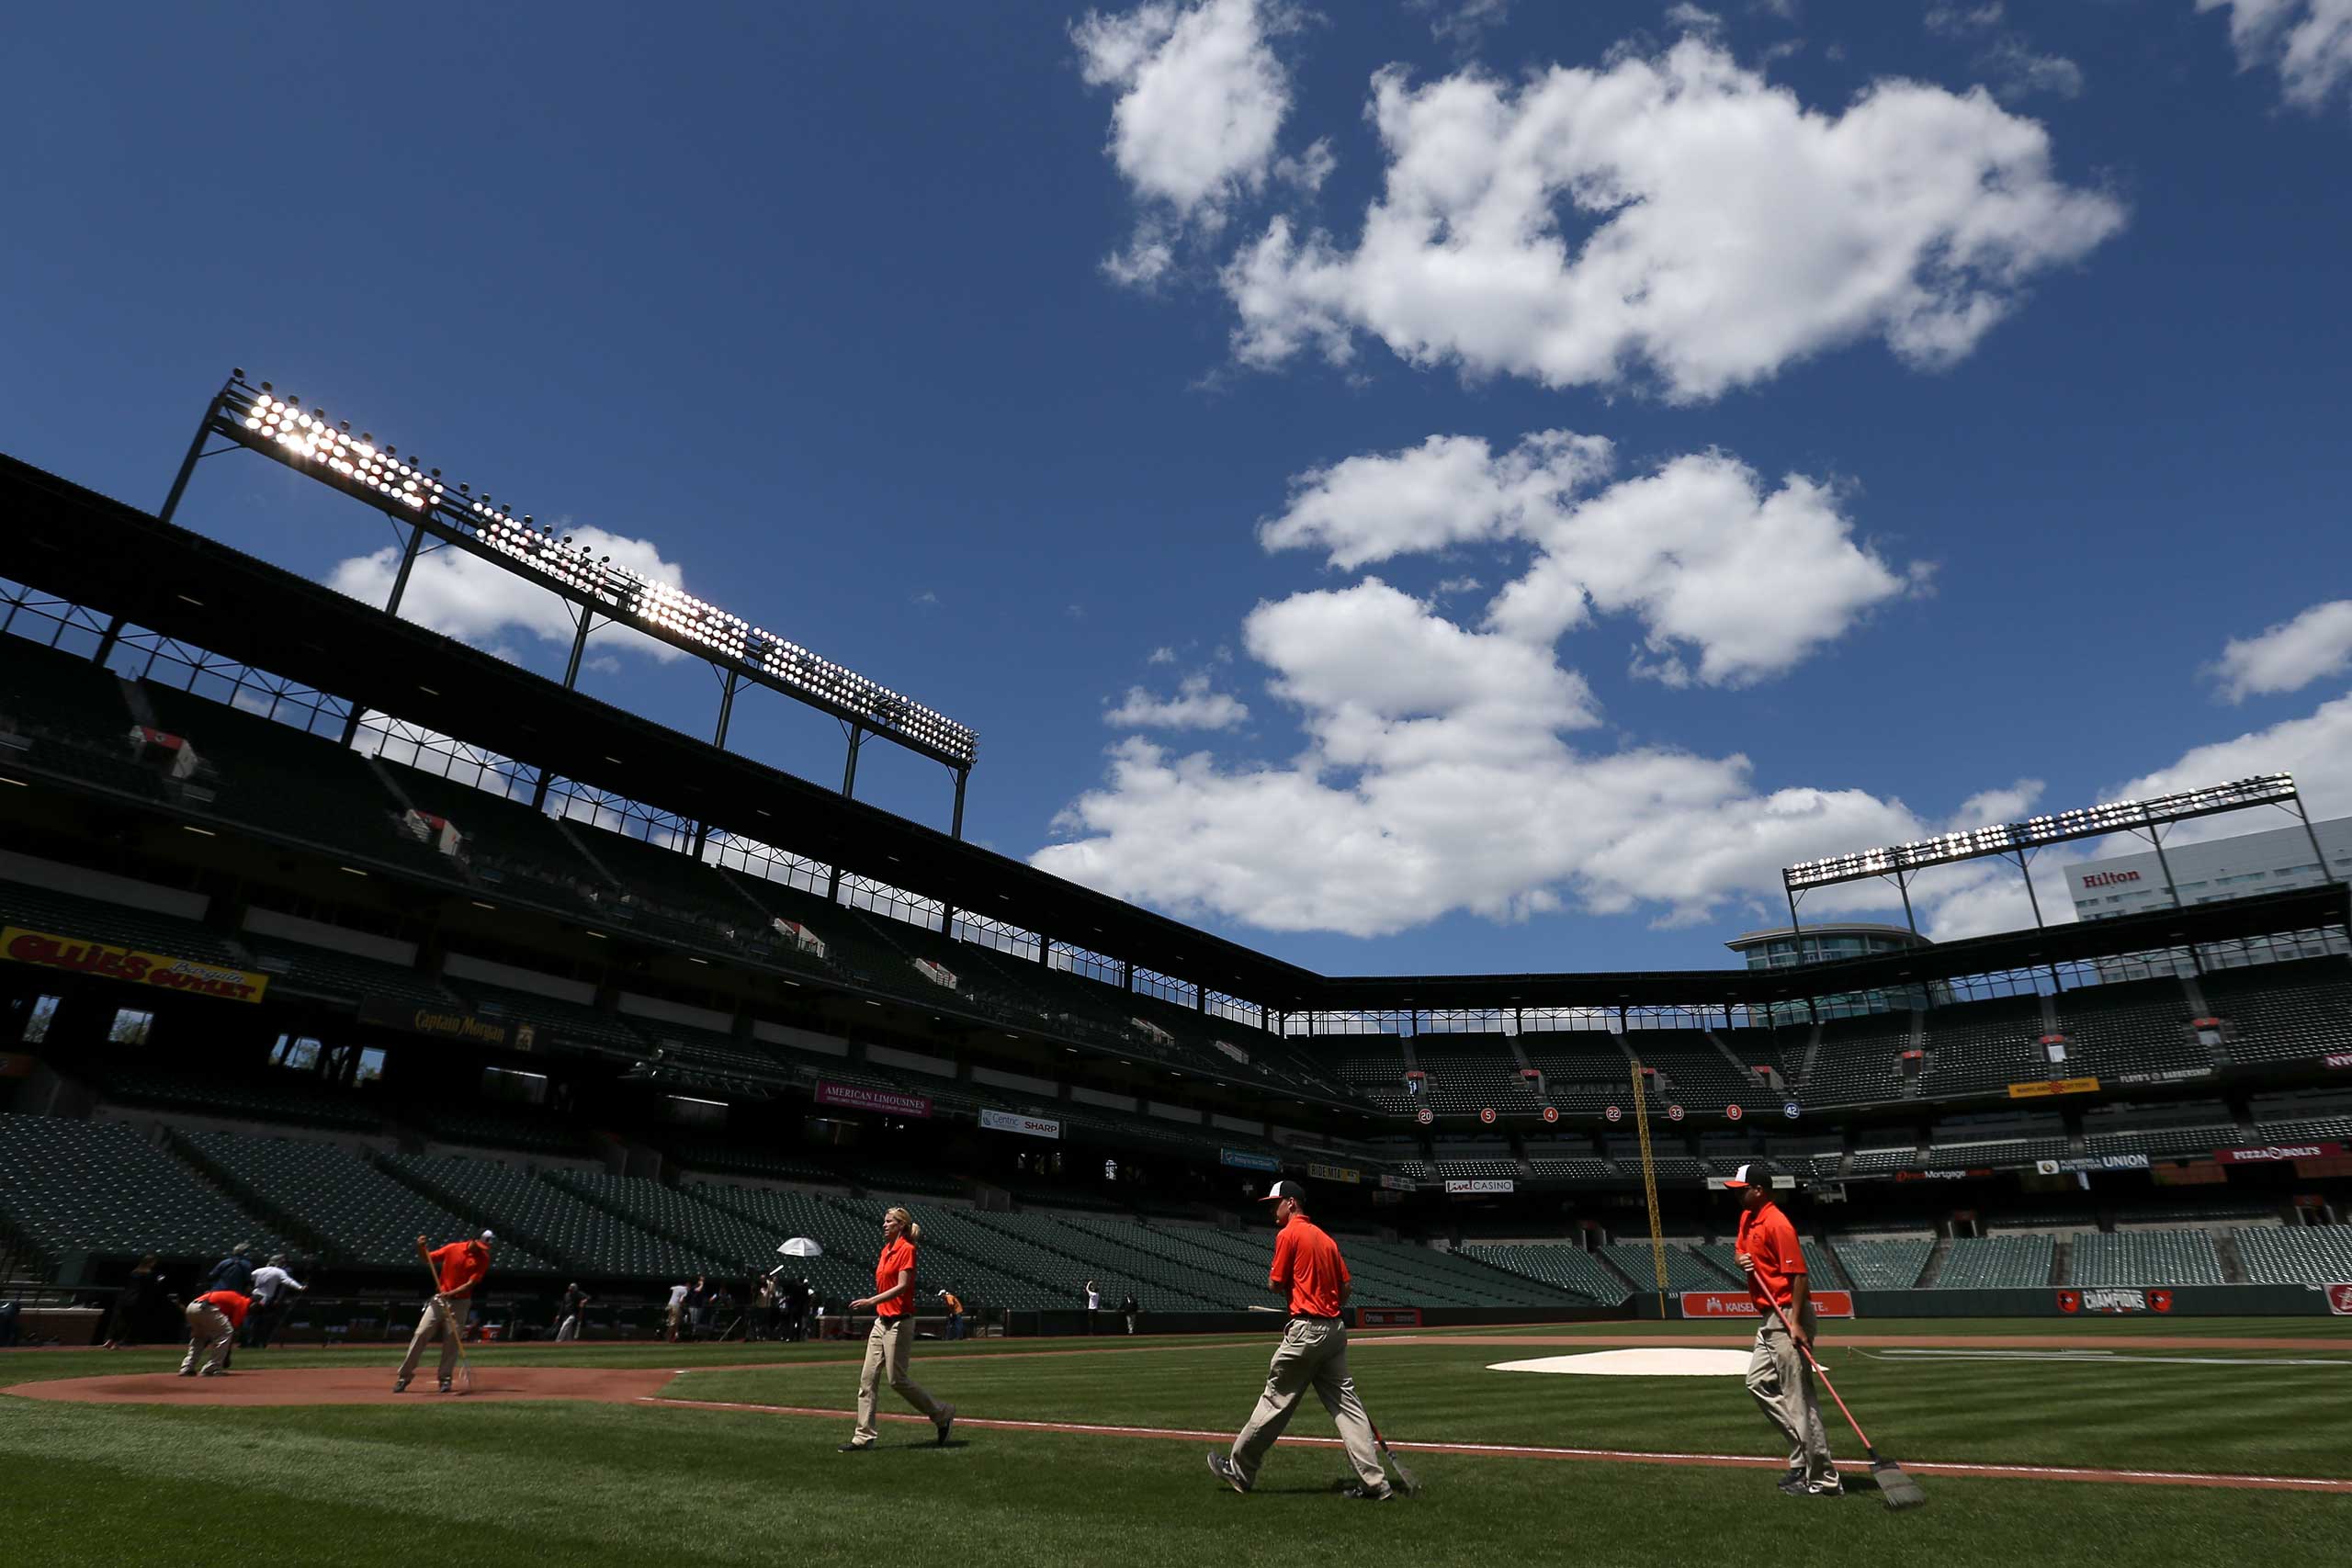 BALTIMORE, MD - APRIL 29: The grounds crew prepares the field before the Baltimore Orioles play the Chicago White Sox at an empty Oriole Park at Camden Yards on April 29, 2015 in Baltimore, Maryland. Due to unrest in relation to the arrest and death of Freddie Gray, the two teams played in a stadium closed to the public. Gray, 25, was arrested for possessing a switch blade knife April 12 outside the Gilmor Houses housing project on Baltimore's west side. According to his attorney, Gray died a week later in the hospital from a severe spinal cord injury he received while in police custody. (Photo by Patrick Smith/Getty Images)